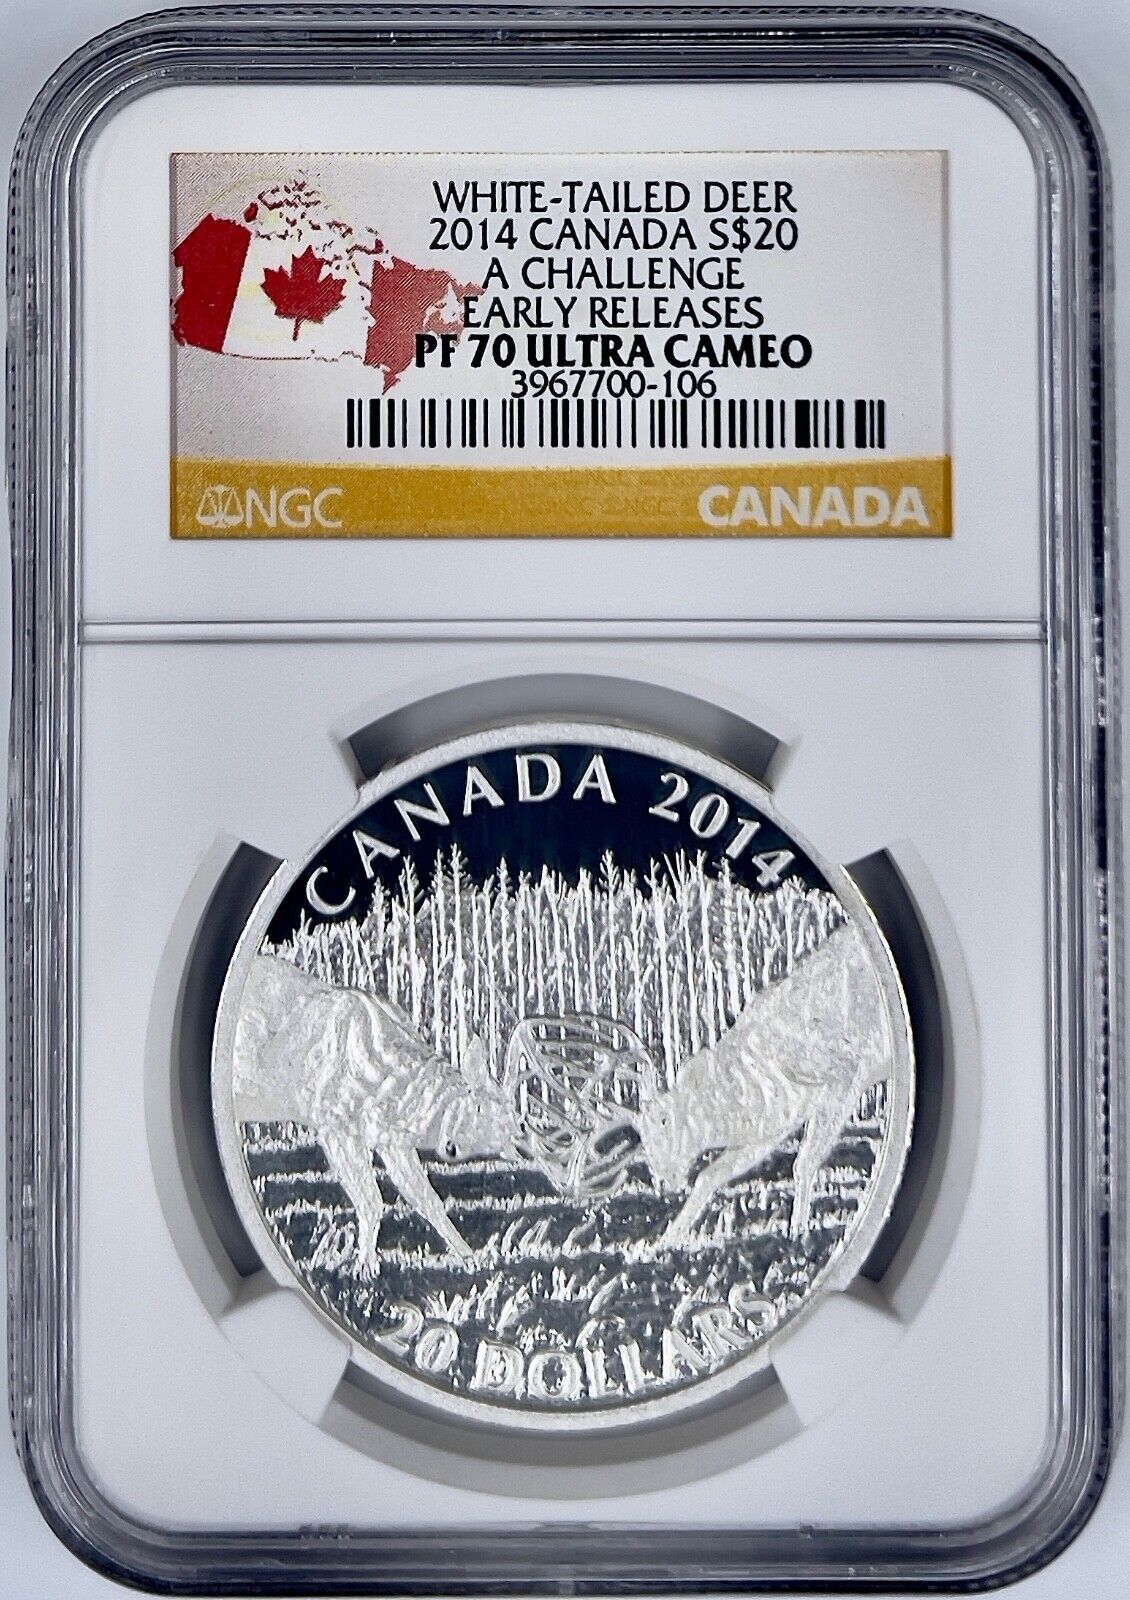 2014 Canada $20 White Tailed Deer A Challenge Silver Coin NGC PF70UCAM ER 9999